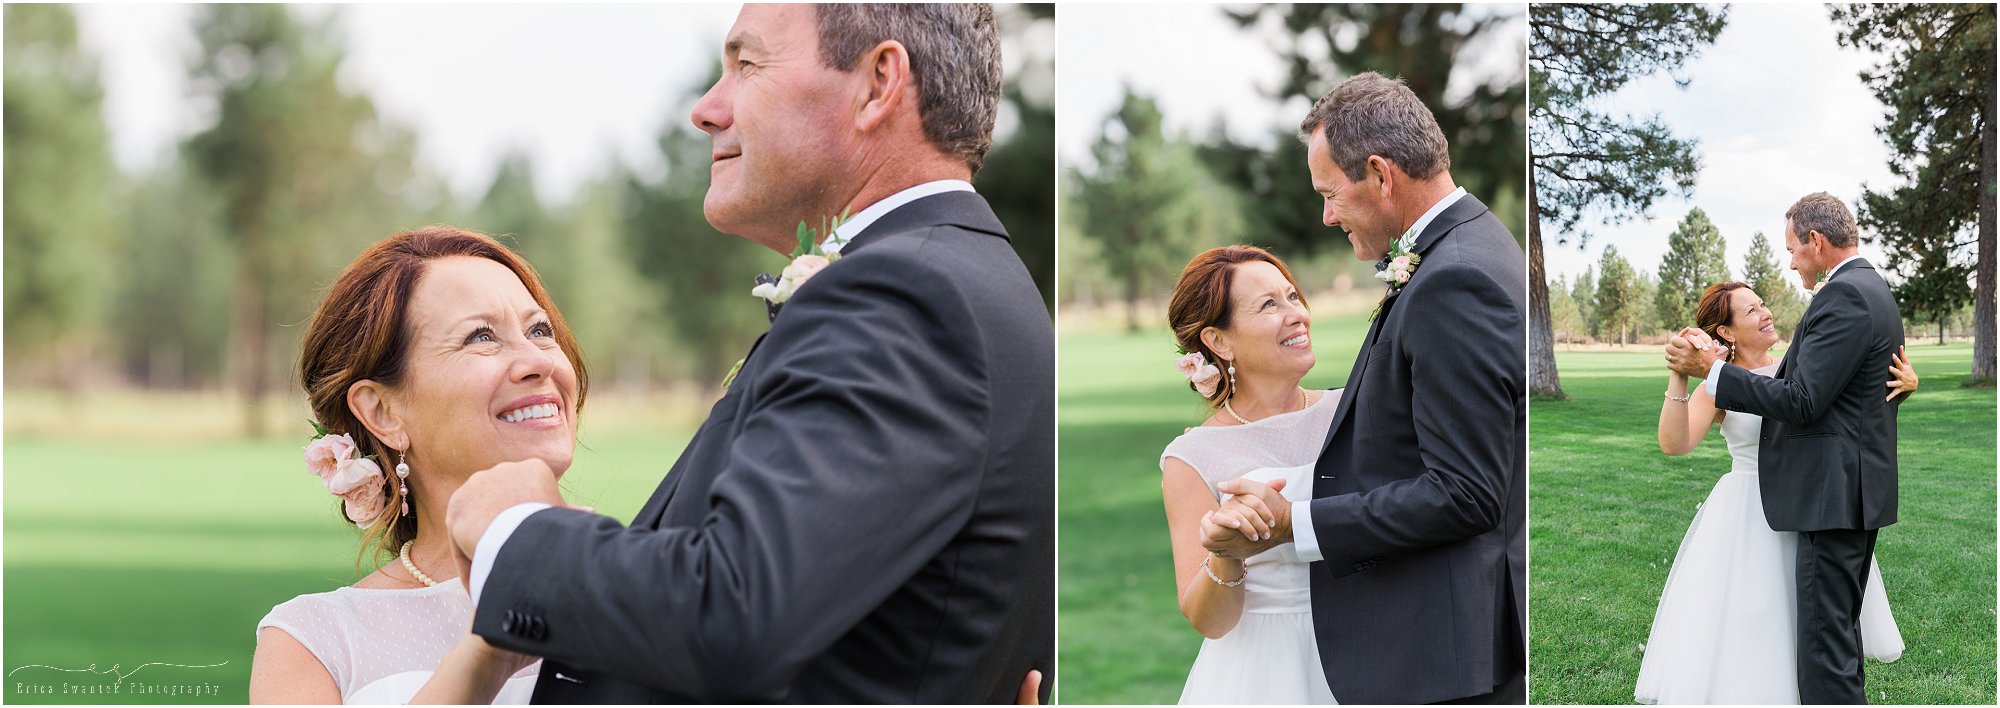 Dancing with your new bride on your wedding day is the best. | Bend wedding photographer Erica Swantek Photography